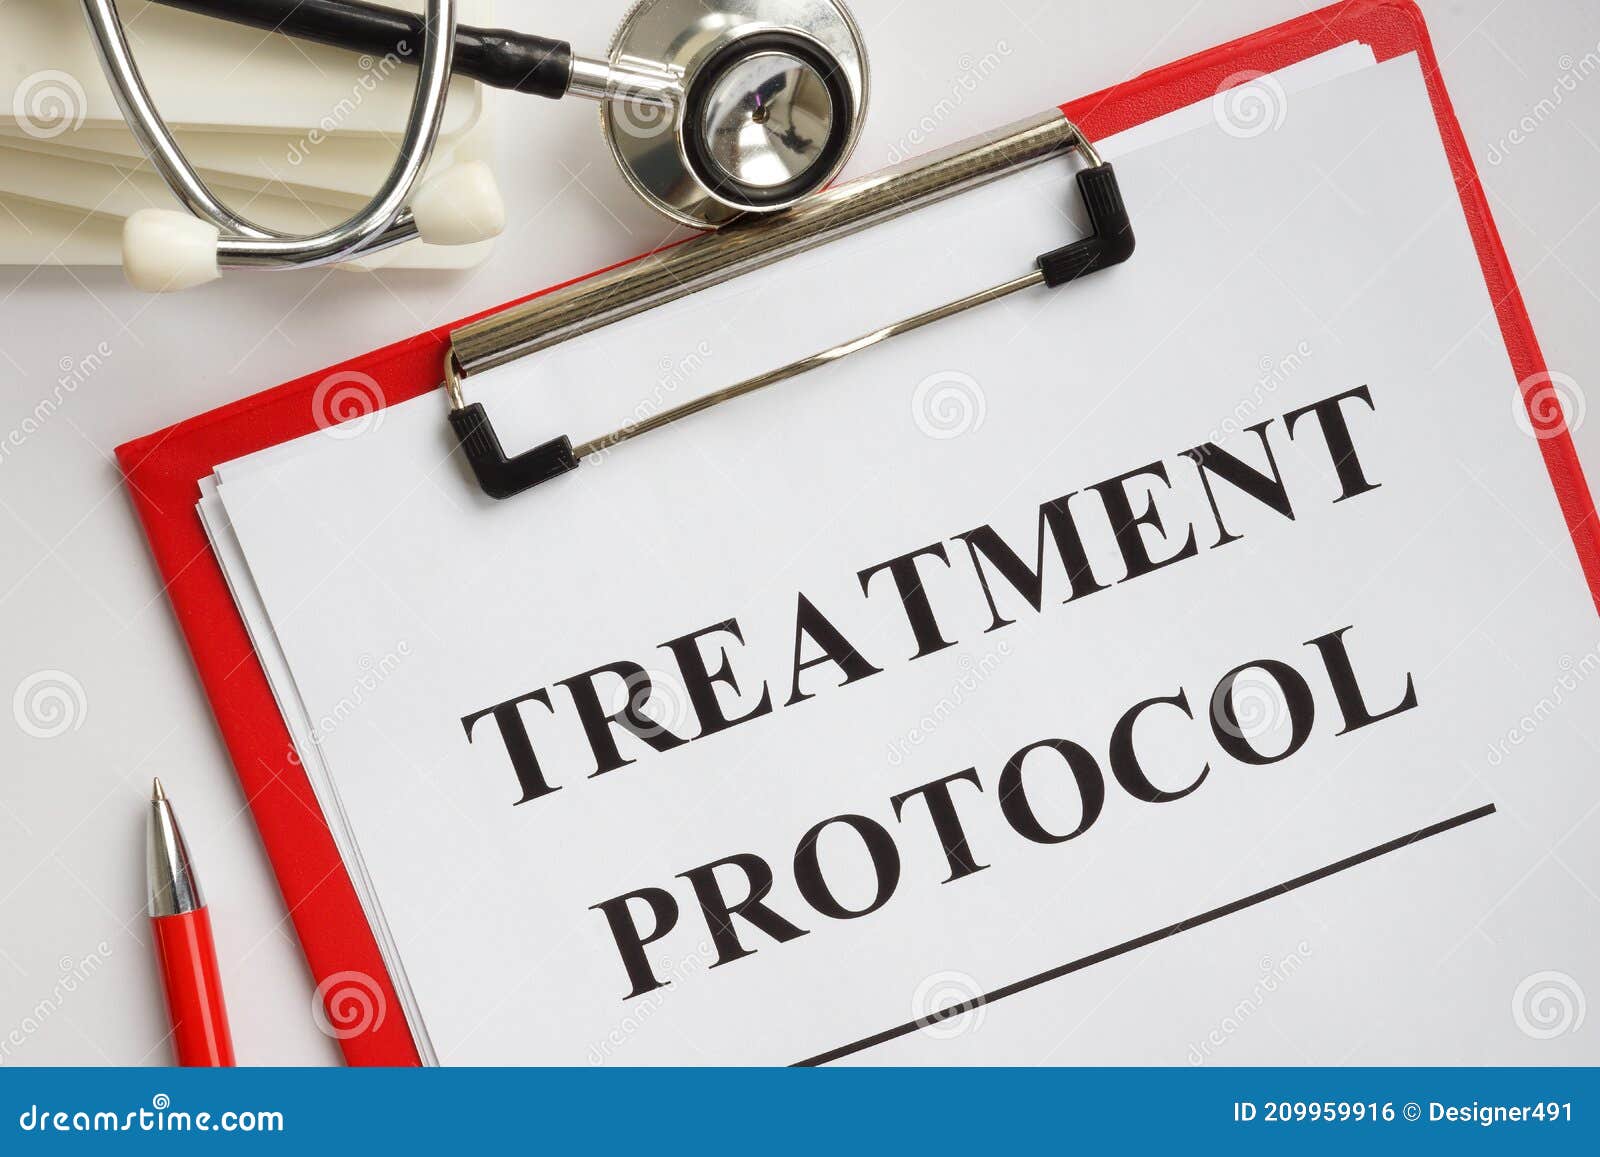 treatment protocol or guidelines and stethoscope in the hospital.